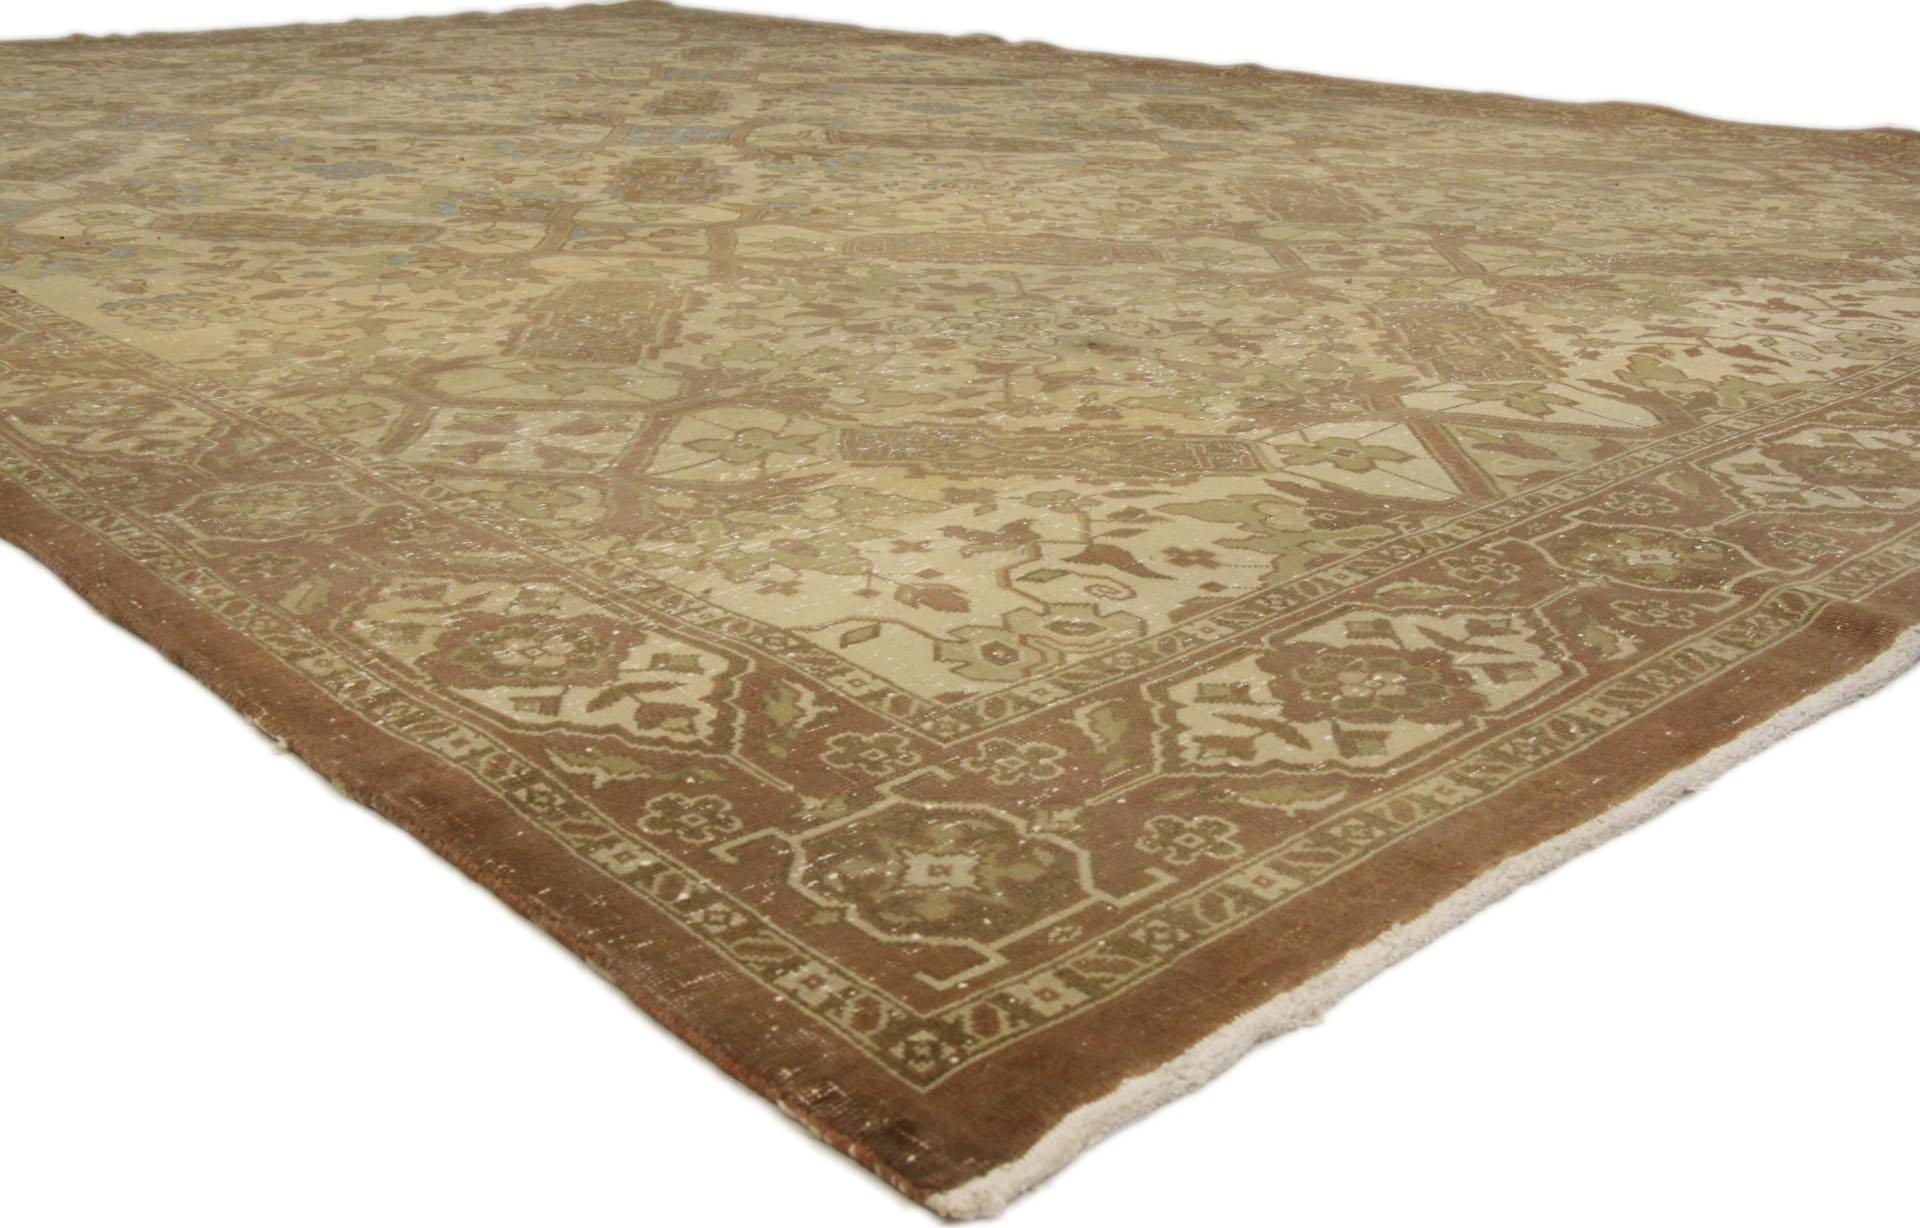 Warm and inviting with rustic sensibility, this hand-knotted wool antique Persian Tabriz rug is poised to impress. The lovingly time-worn tan colored field features an all-over botanical pattern enclosed with a complementary inner and outer guard